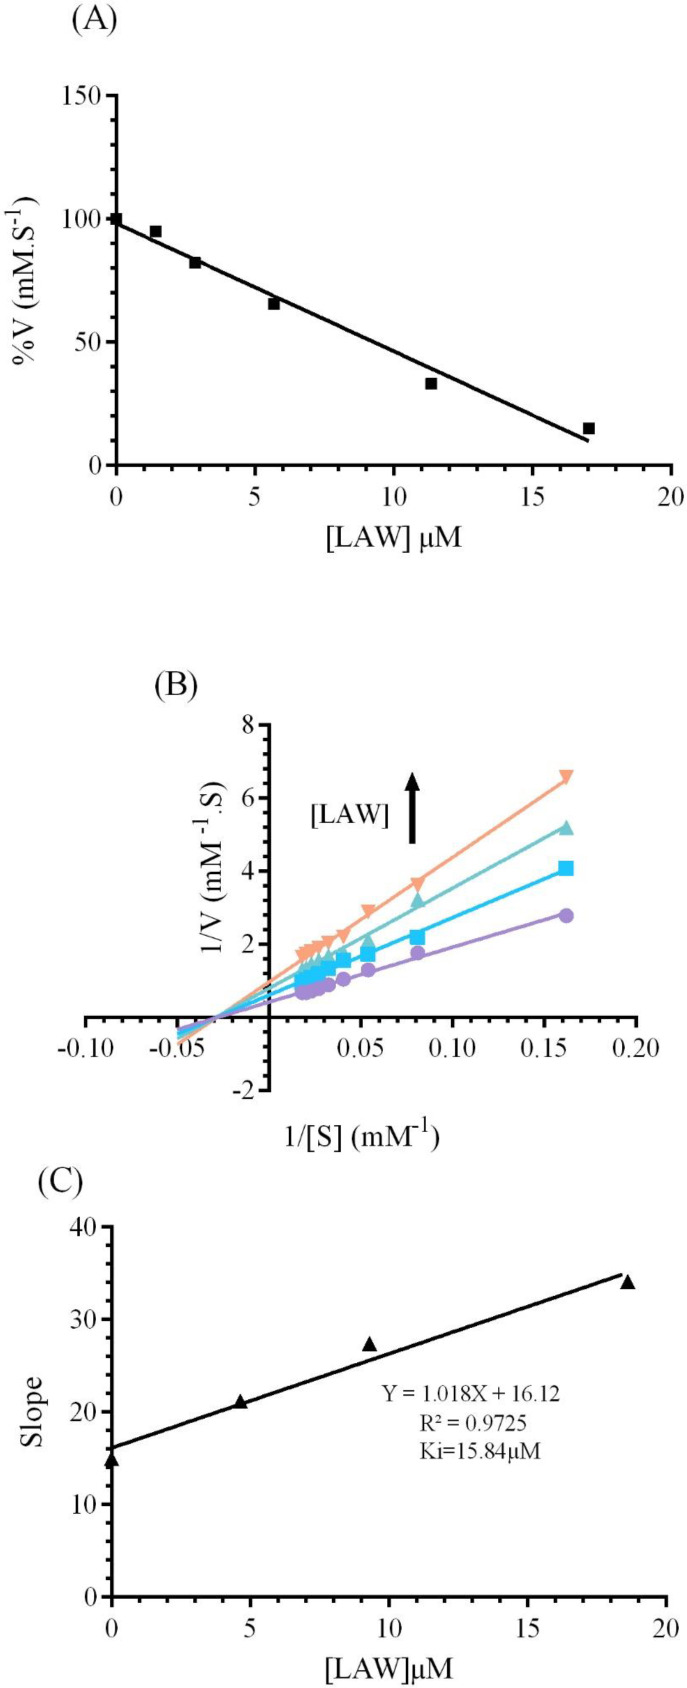 (A) The effect of various concentrations of LAW (0, 1.4, 2.84, 5.68, 11.36 and 17.04 µM) on the activity of BLC (4 nm) in 50 mM phosphate buffer, pH 7 at 298 k. (B) Lineweaver-Burk plot of BLC (4 nm) with and without various concentrations of LAW: 0, 4.6, 9.3, 18.6 µM in 50 mM phosphate buffer, pH 7, 298 k. (C) Secondary plot of BLC activity using the slopes of the primary Lineweaver–Burk plots versus concentrations of LAW